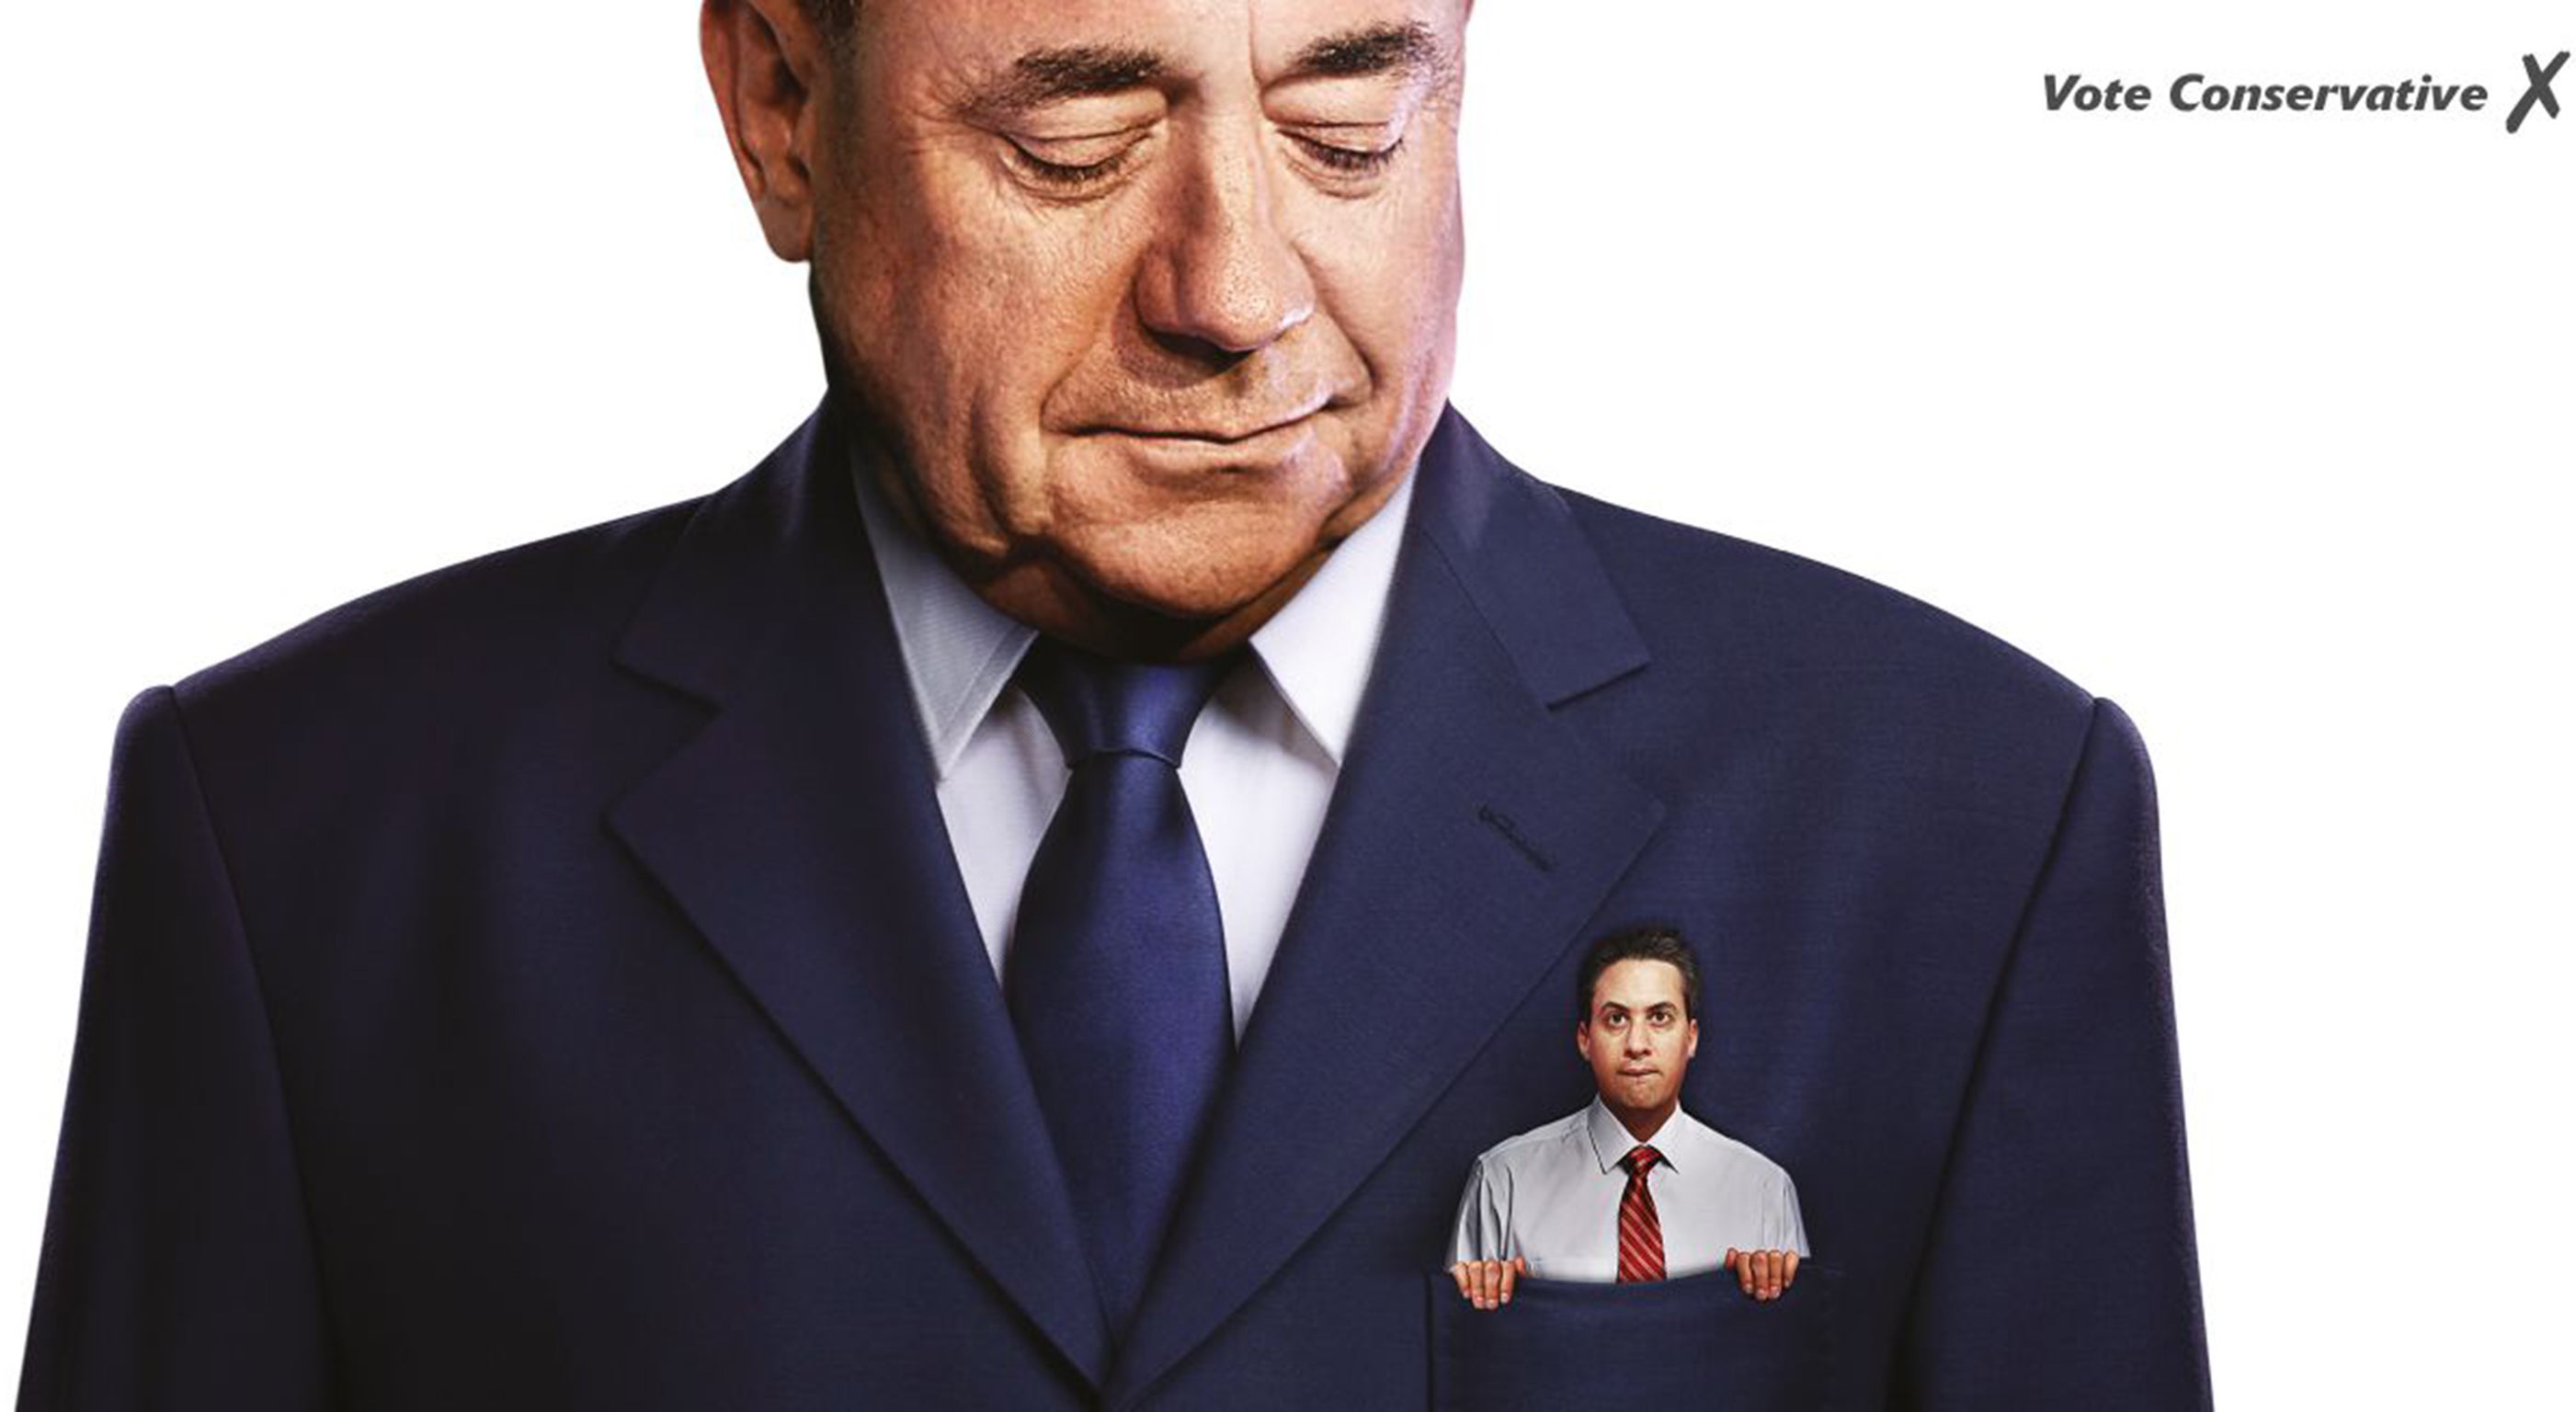 The original Tory election poster featuring Alex Salmond and Ed Miliband